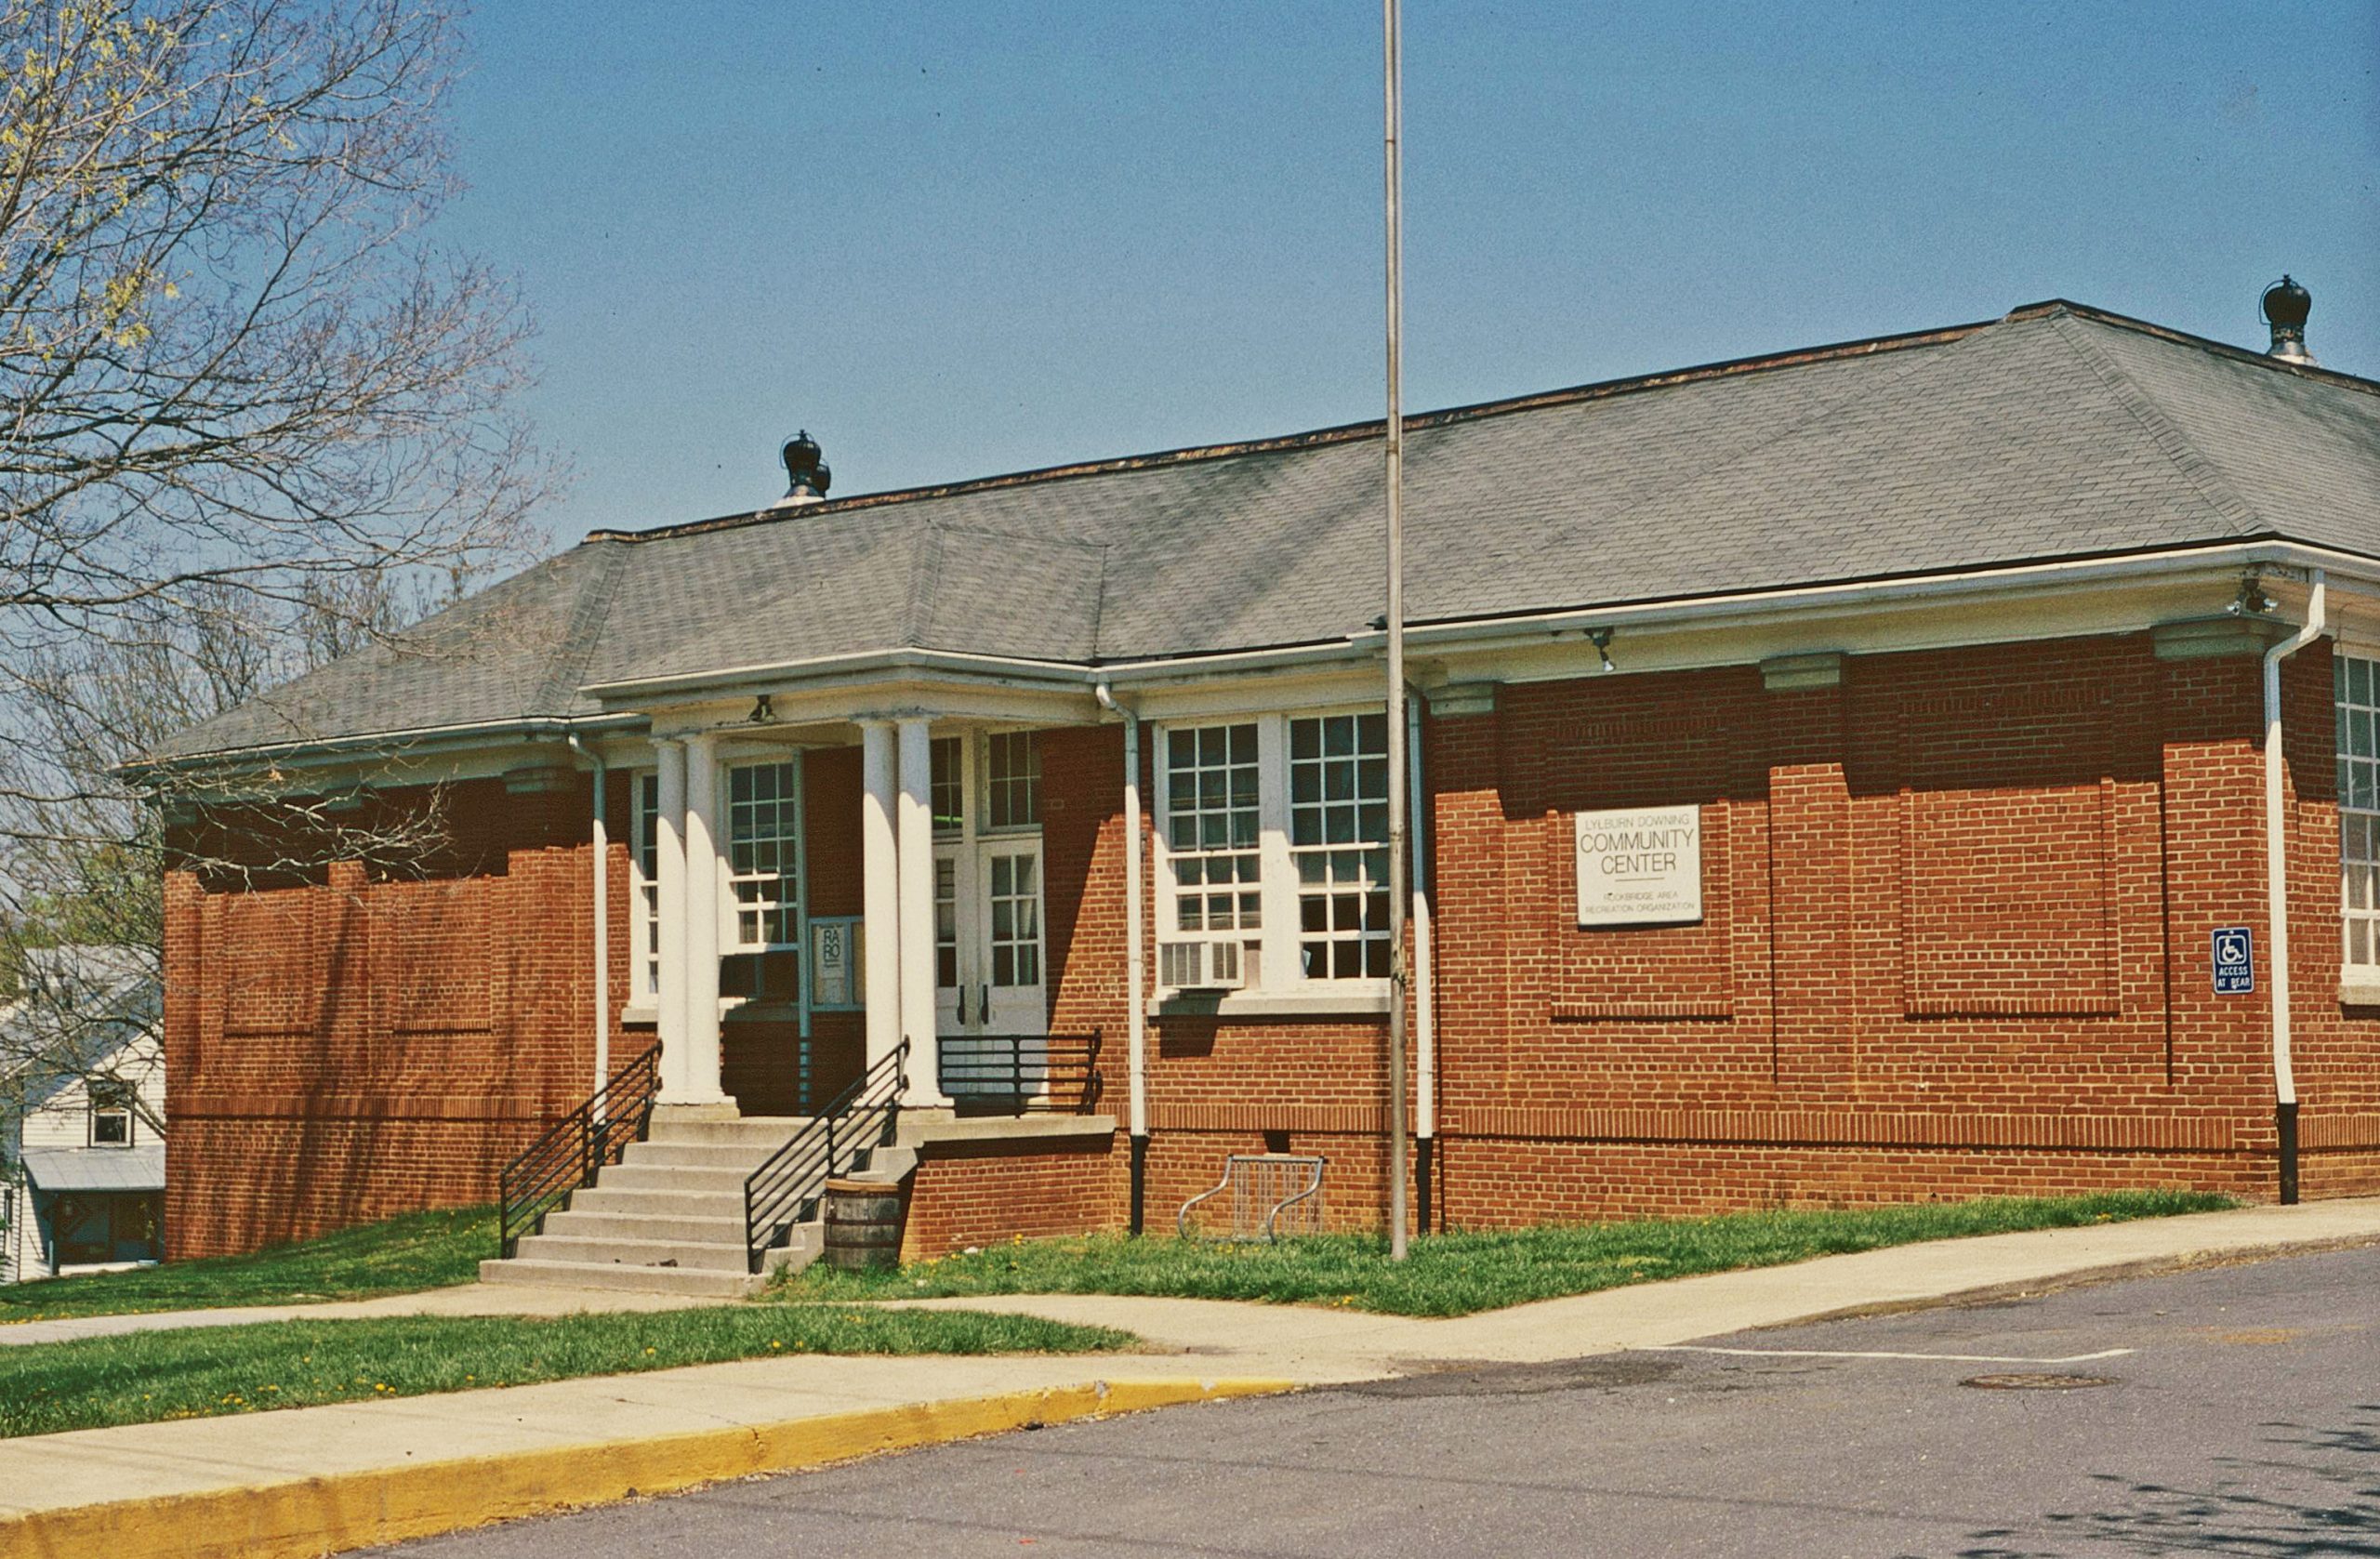 117-5002_Lylburn_Downing_School_2003_exterior_front_facade_VLR_Online-DHR-scaled